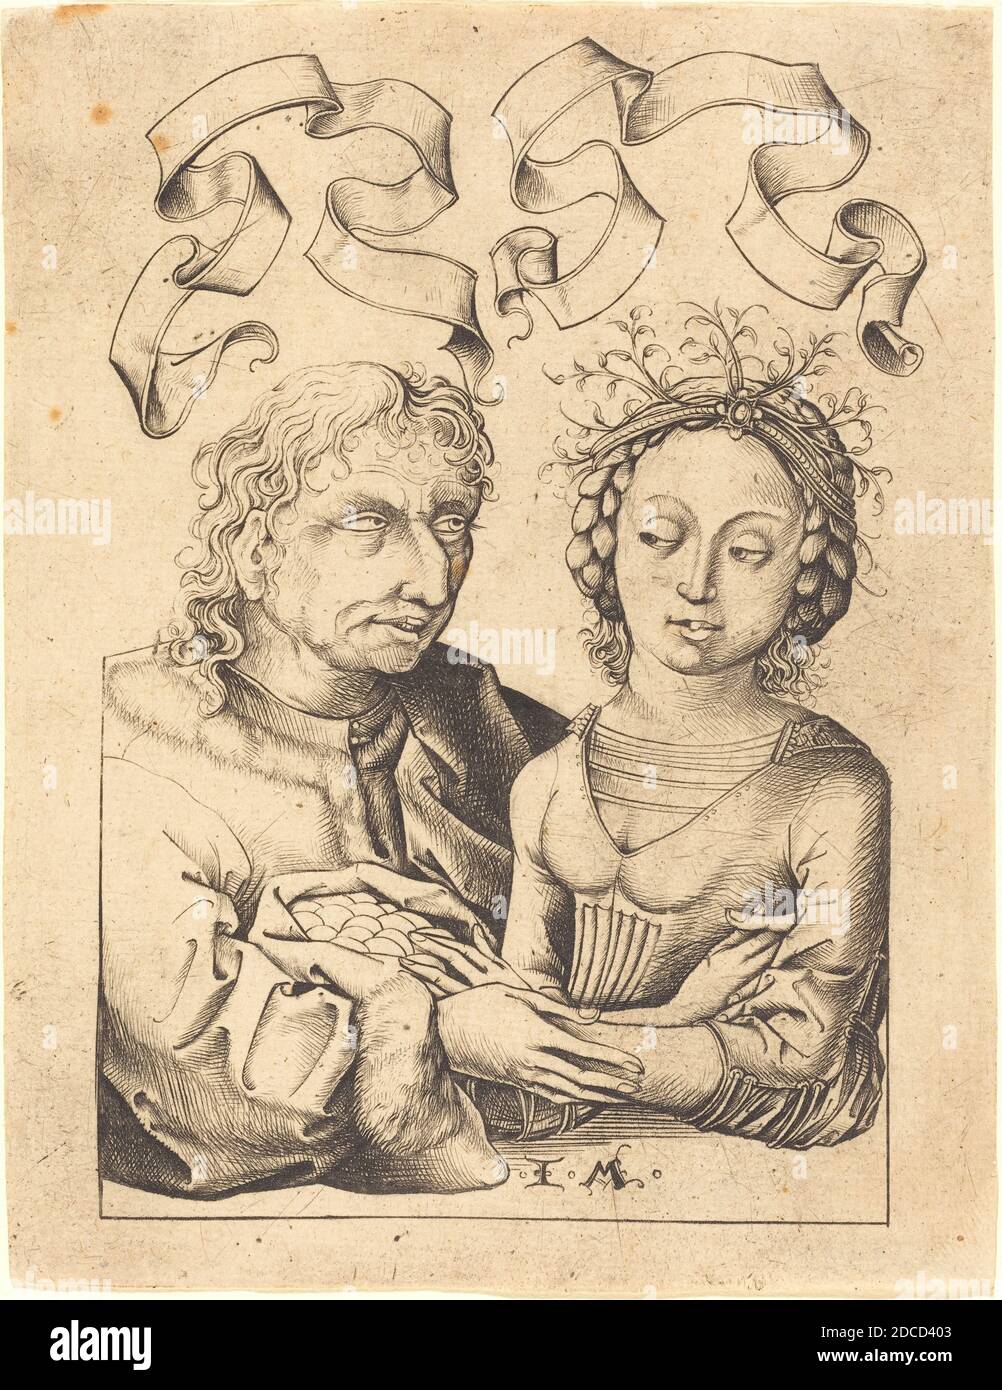 Israhel van Meckenem, (artist), German, c. 1445 - 1503, Master of the Housebook, (artist after), German, active c. 1470 - 1500, The Foolish Old Man and the Young Girl, c. 1480/1490, engraving Stock Photo